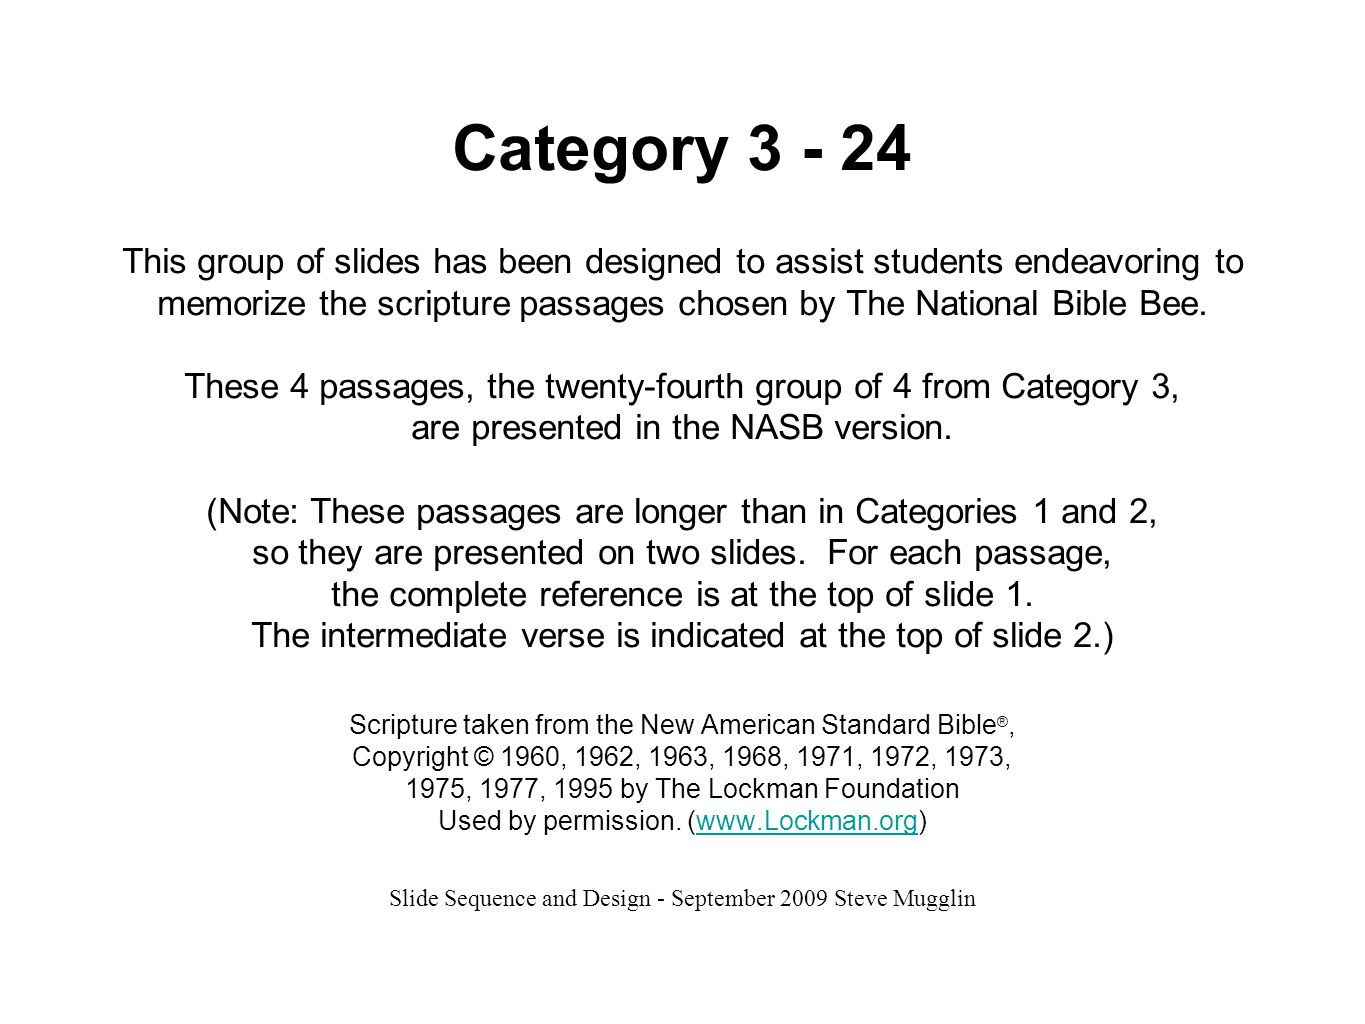 Category This group of slides has been designed to assist students endeavoring to memorize the scripture passages chosen by The National Bible Bee.